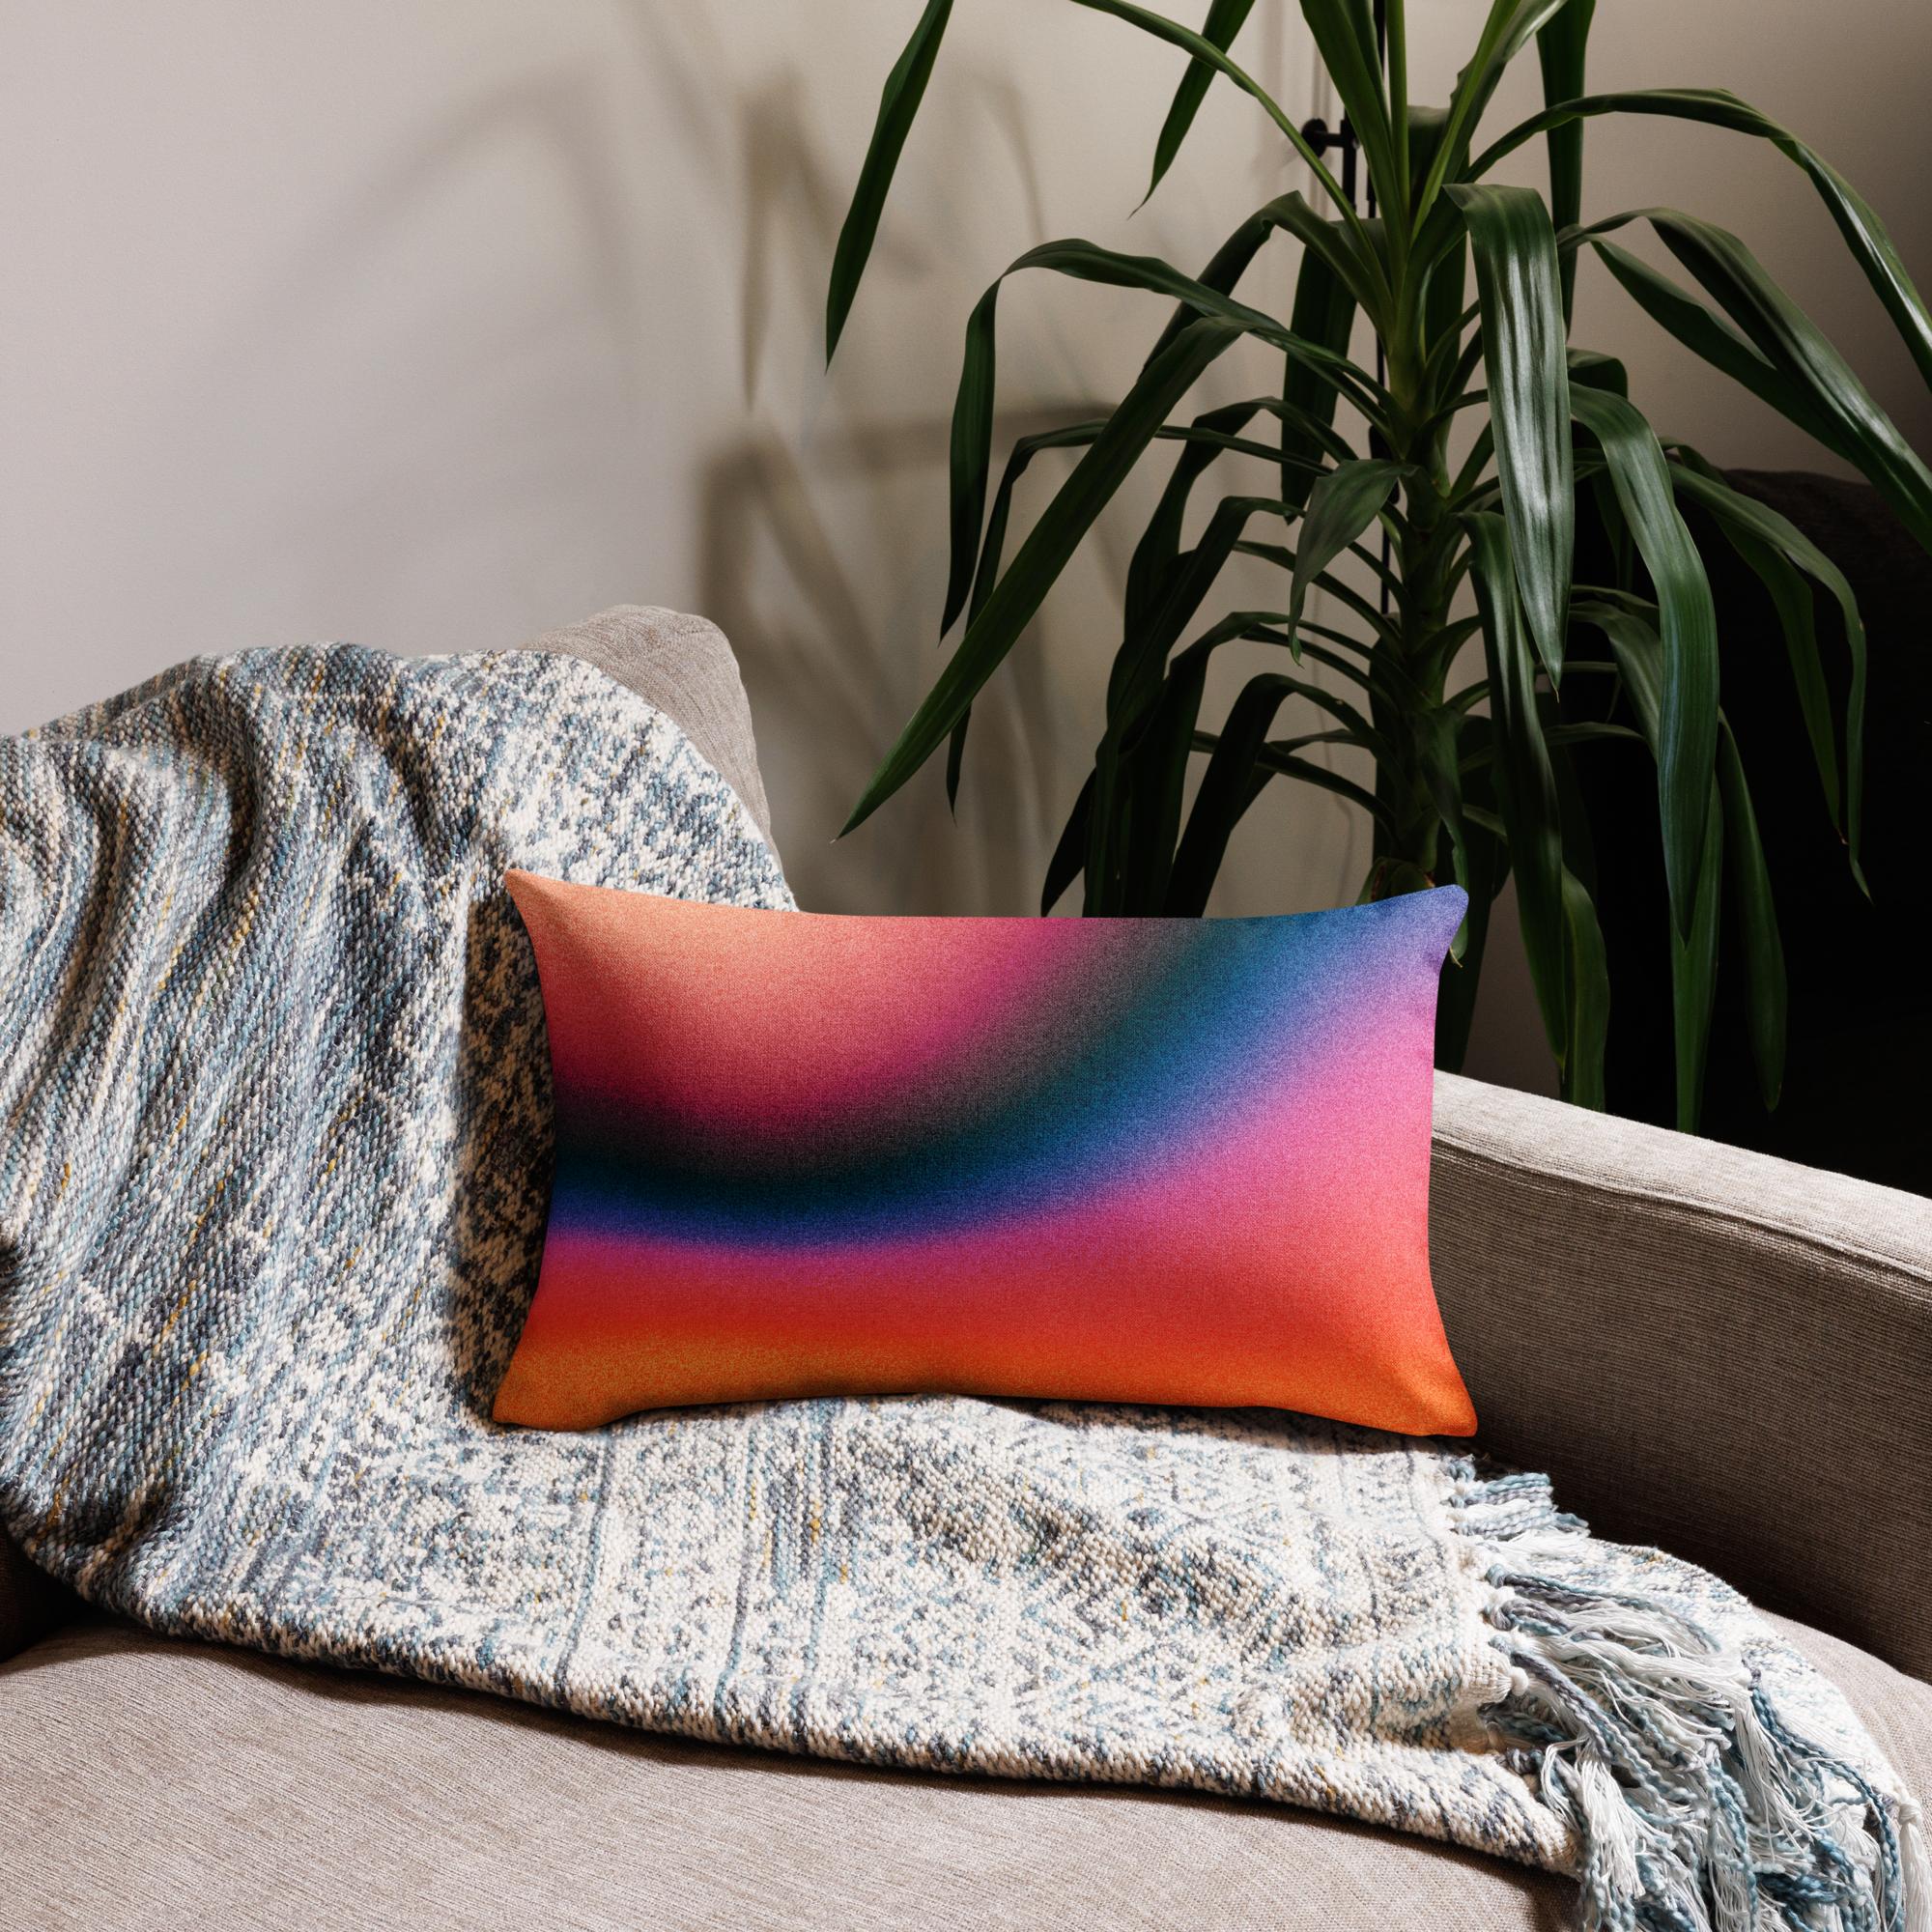 Colorful Dreams: Premium Polyester Pillow with Multicolor